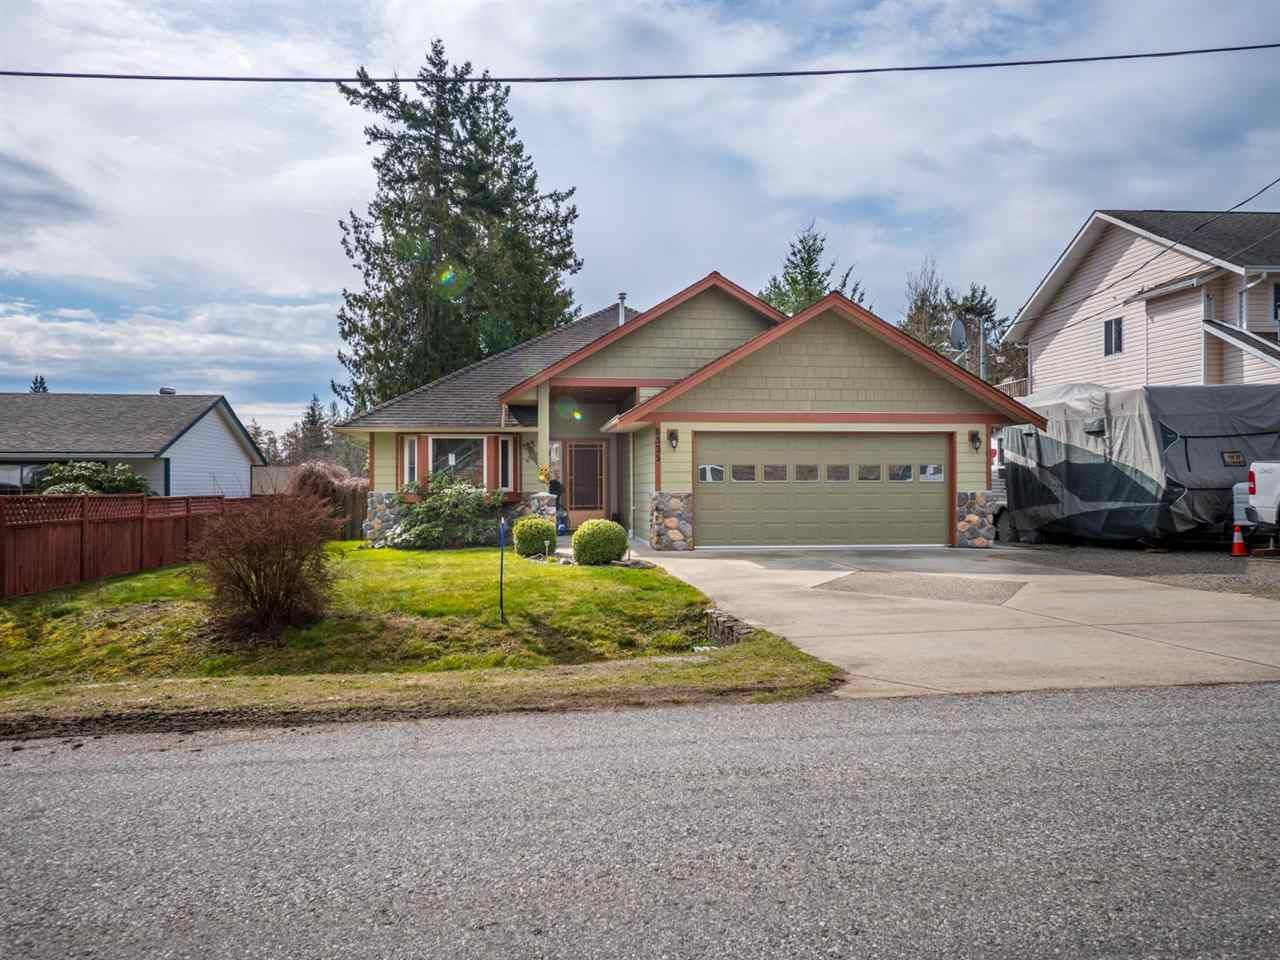 Main Photo: 6335 PICADILLY Place in Sechelt: Sechelt District House for sale (Sunshine Coast)  : MLS®# R2248834